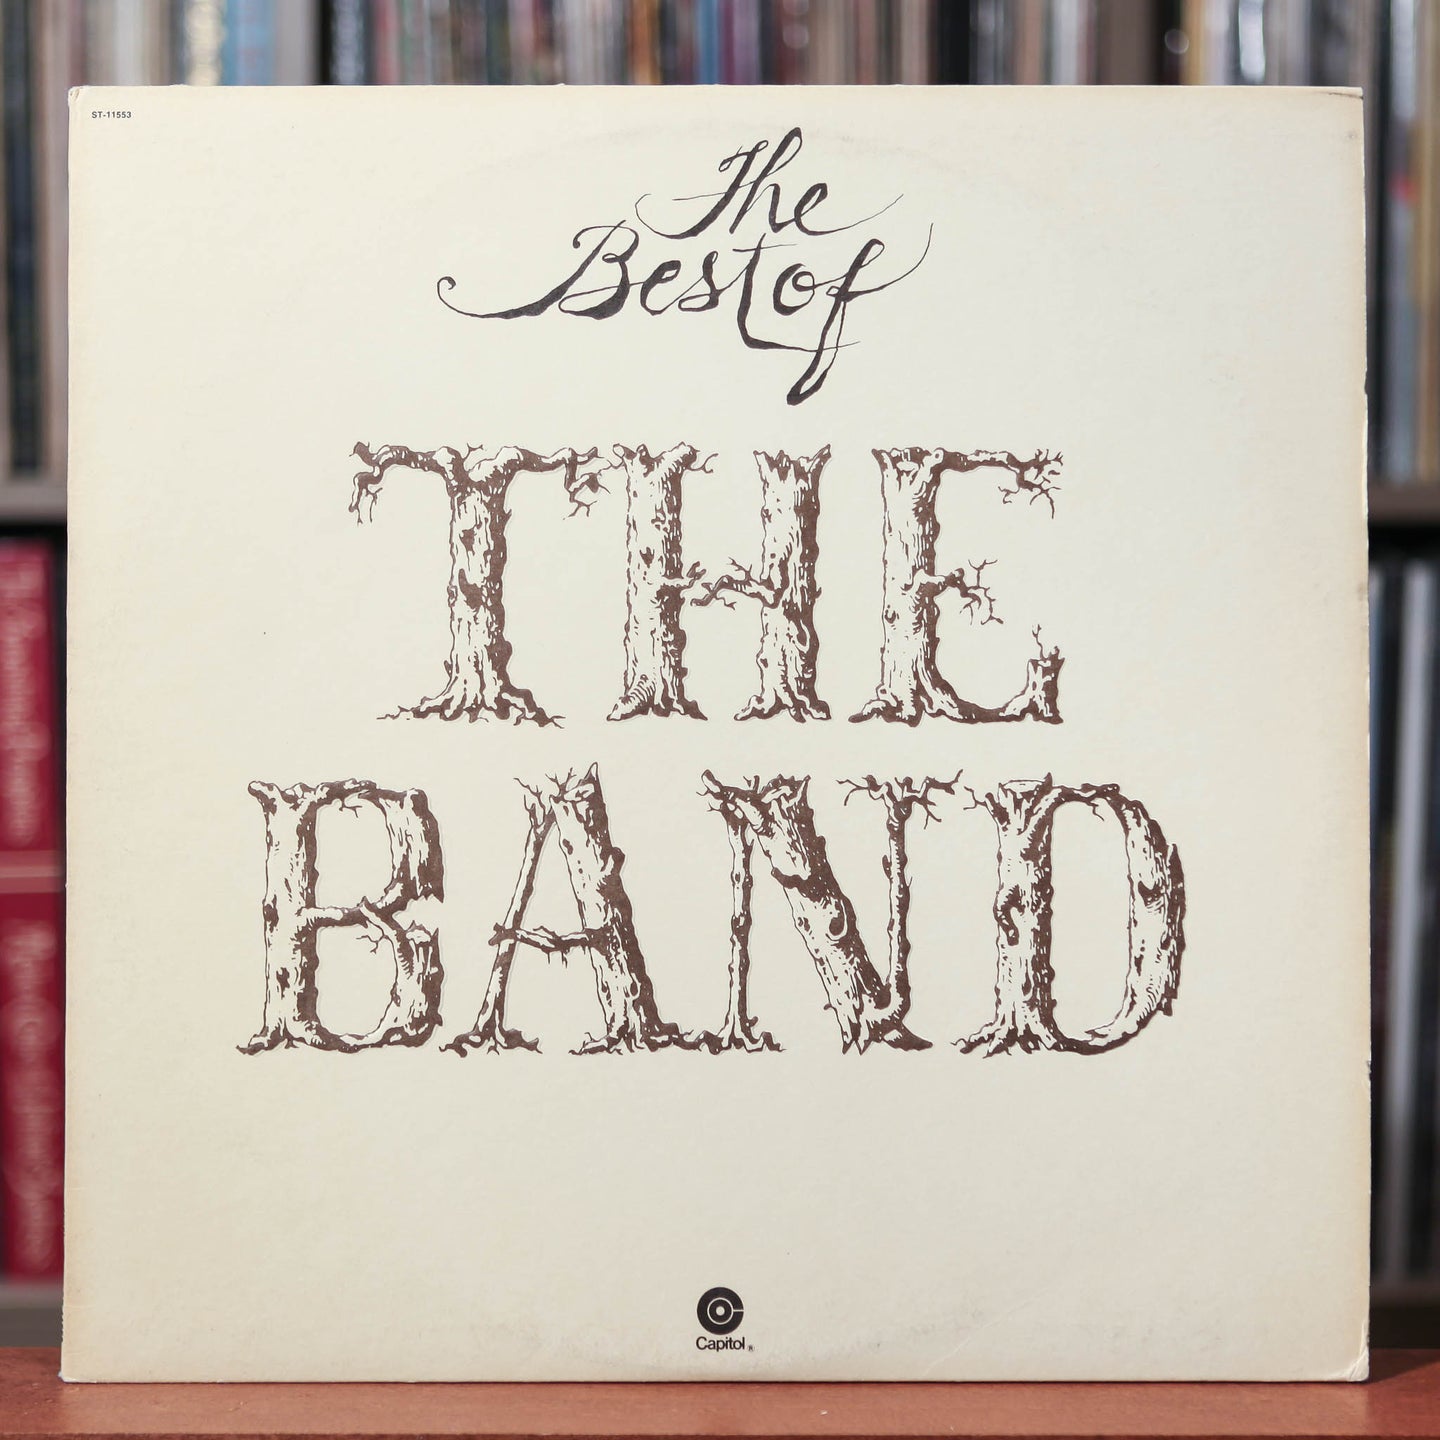 The Band - The Best Of - 1976 Capitol, EX/NM